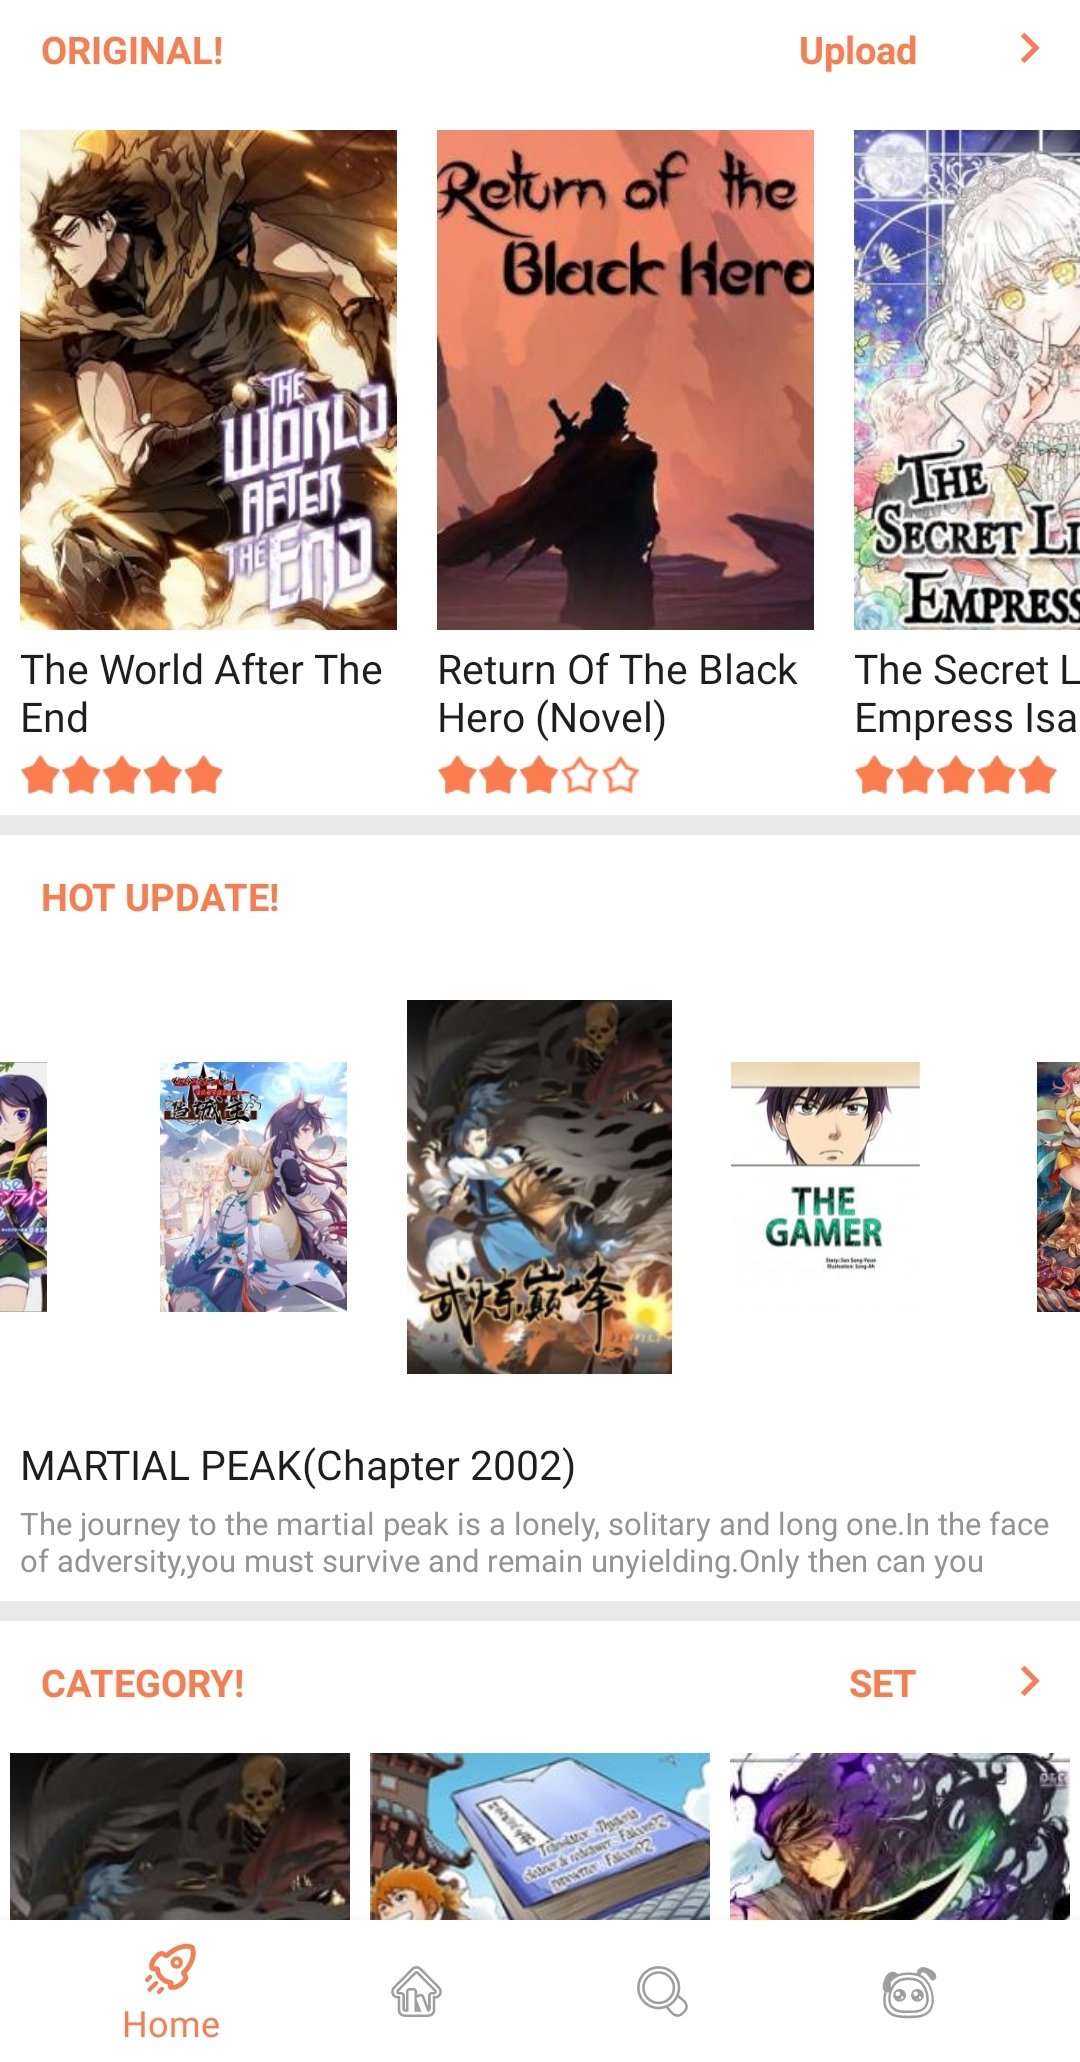 S Manga Pro APK for Android - Latest Version (Free Download)